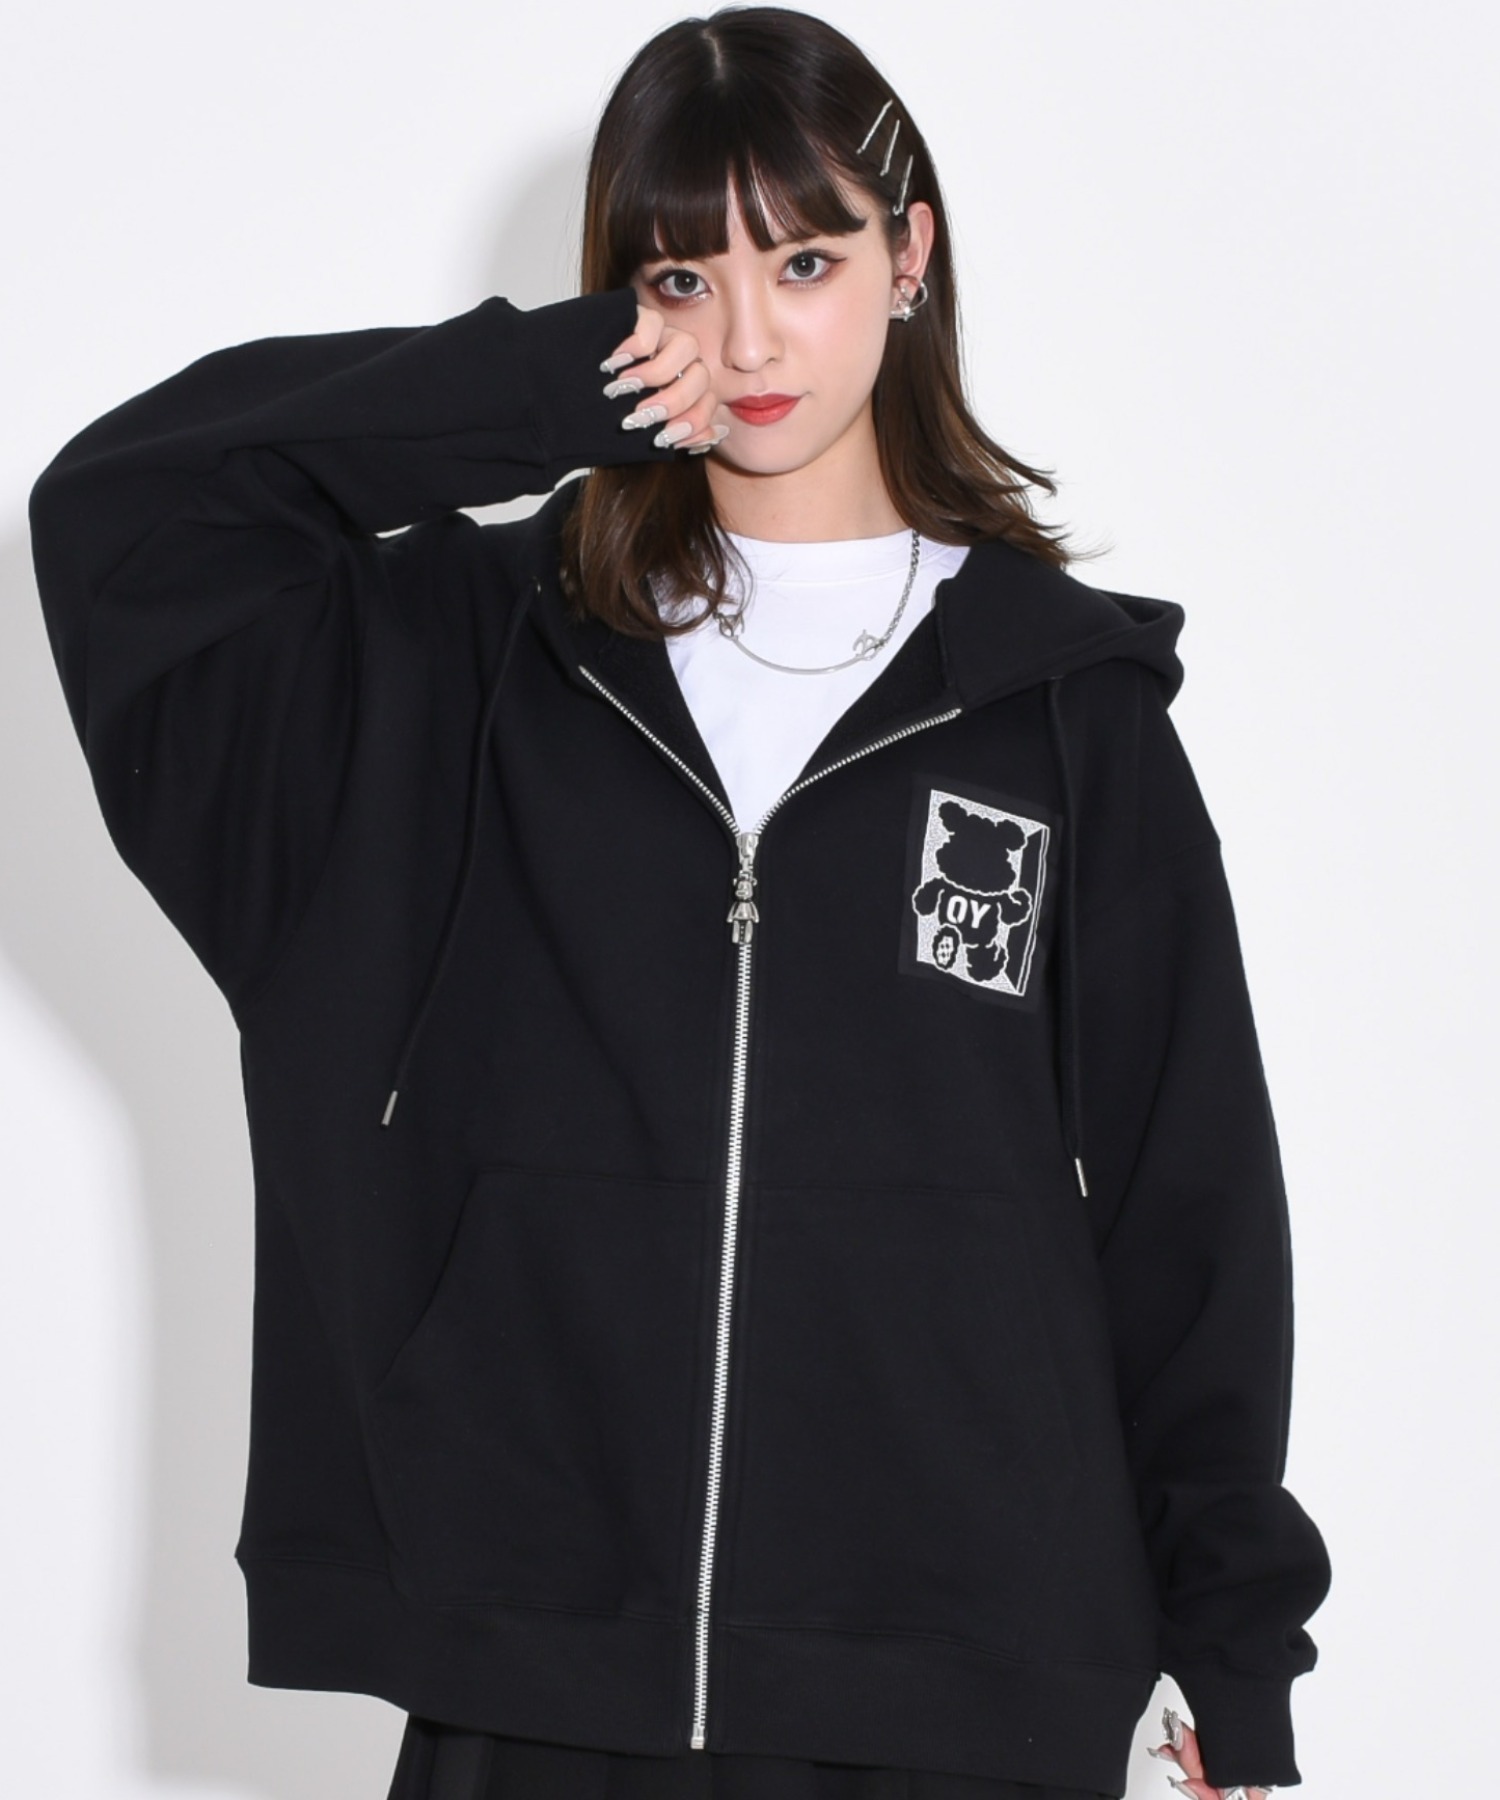 OY ODOLLY HOODIE ZIP UP/オードリーフーディージップアップUSED